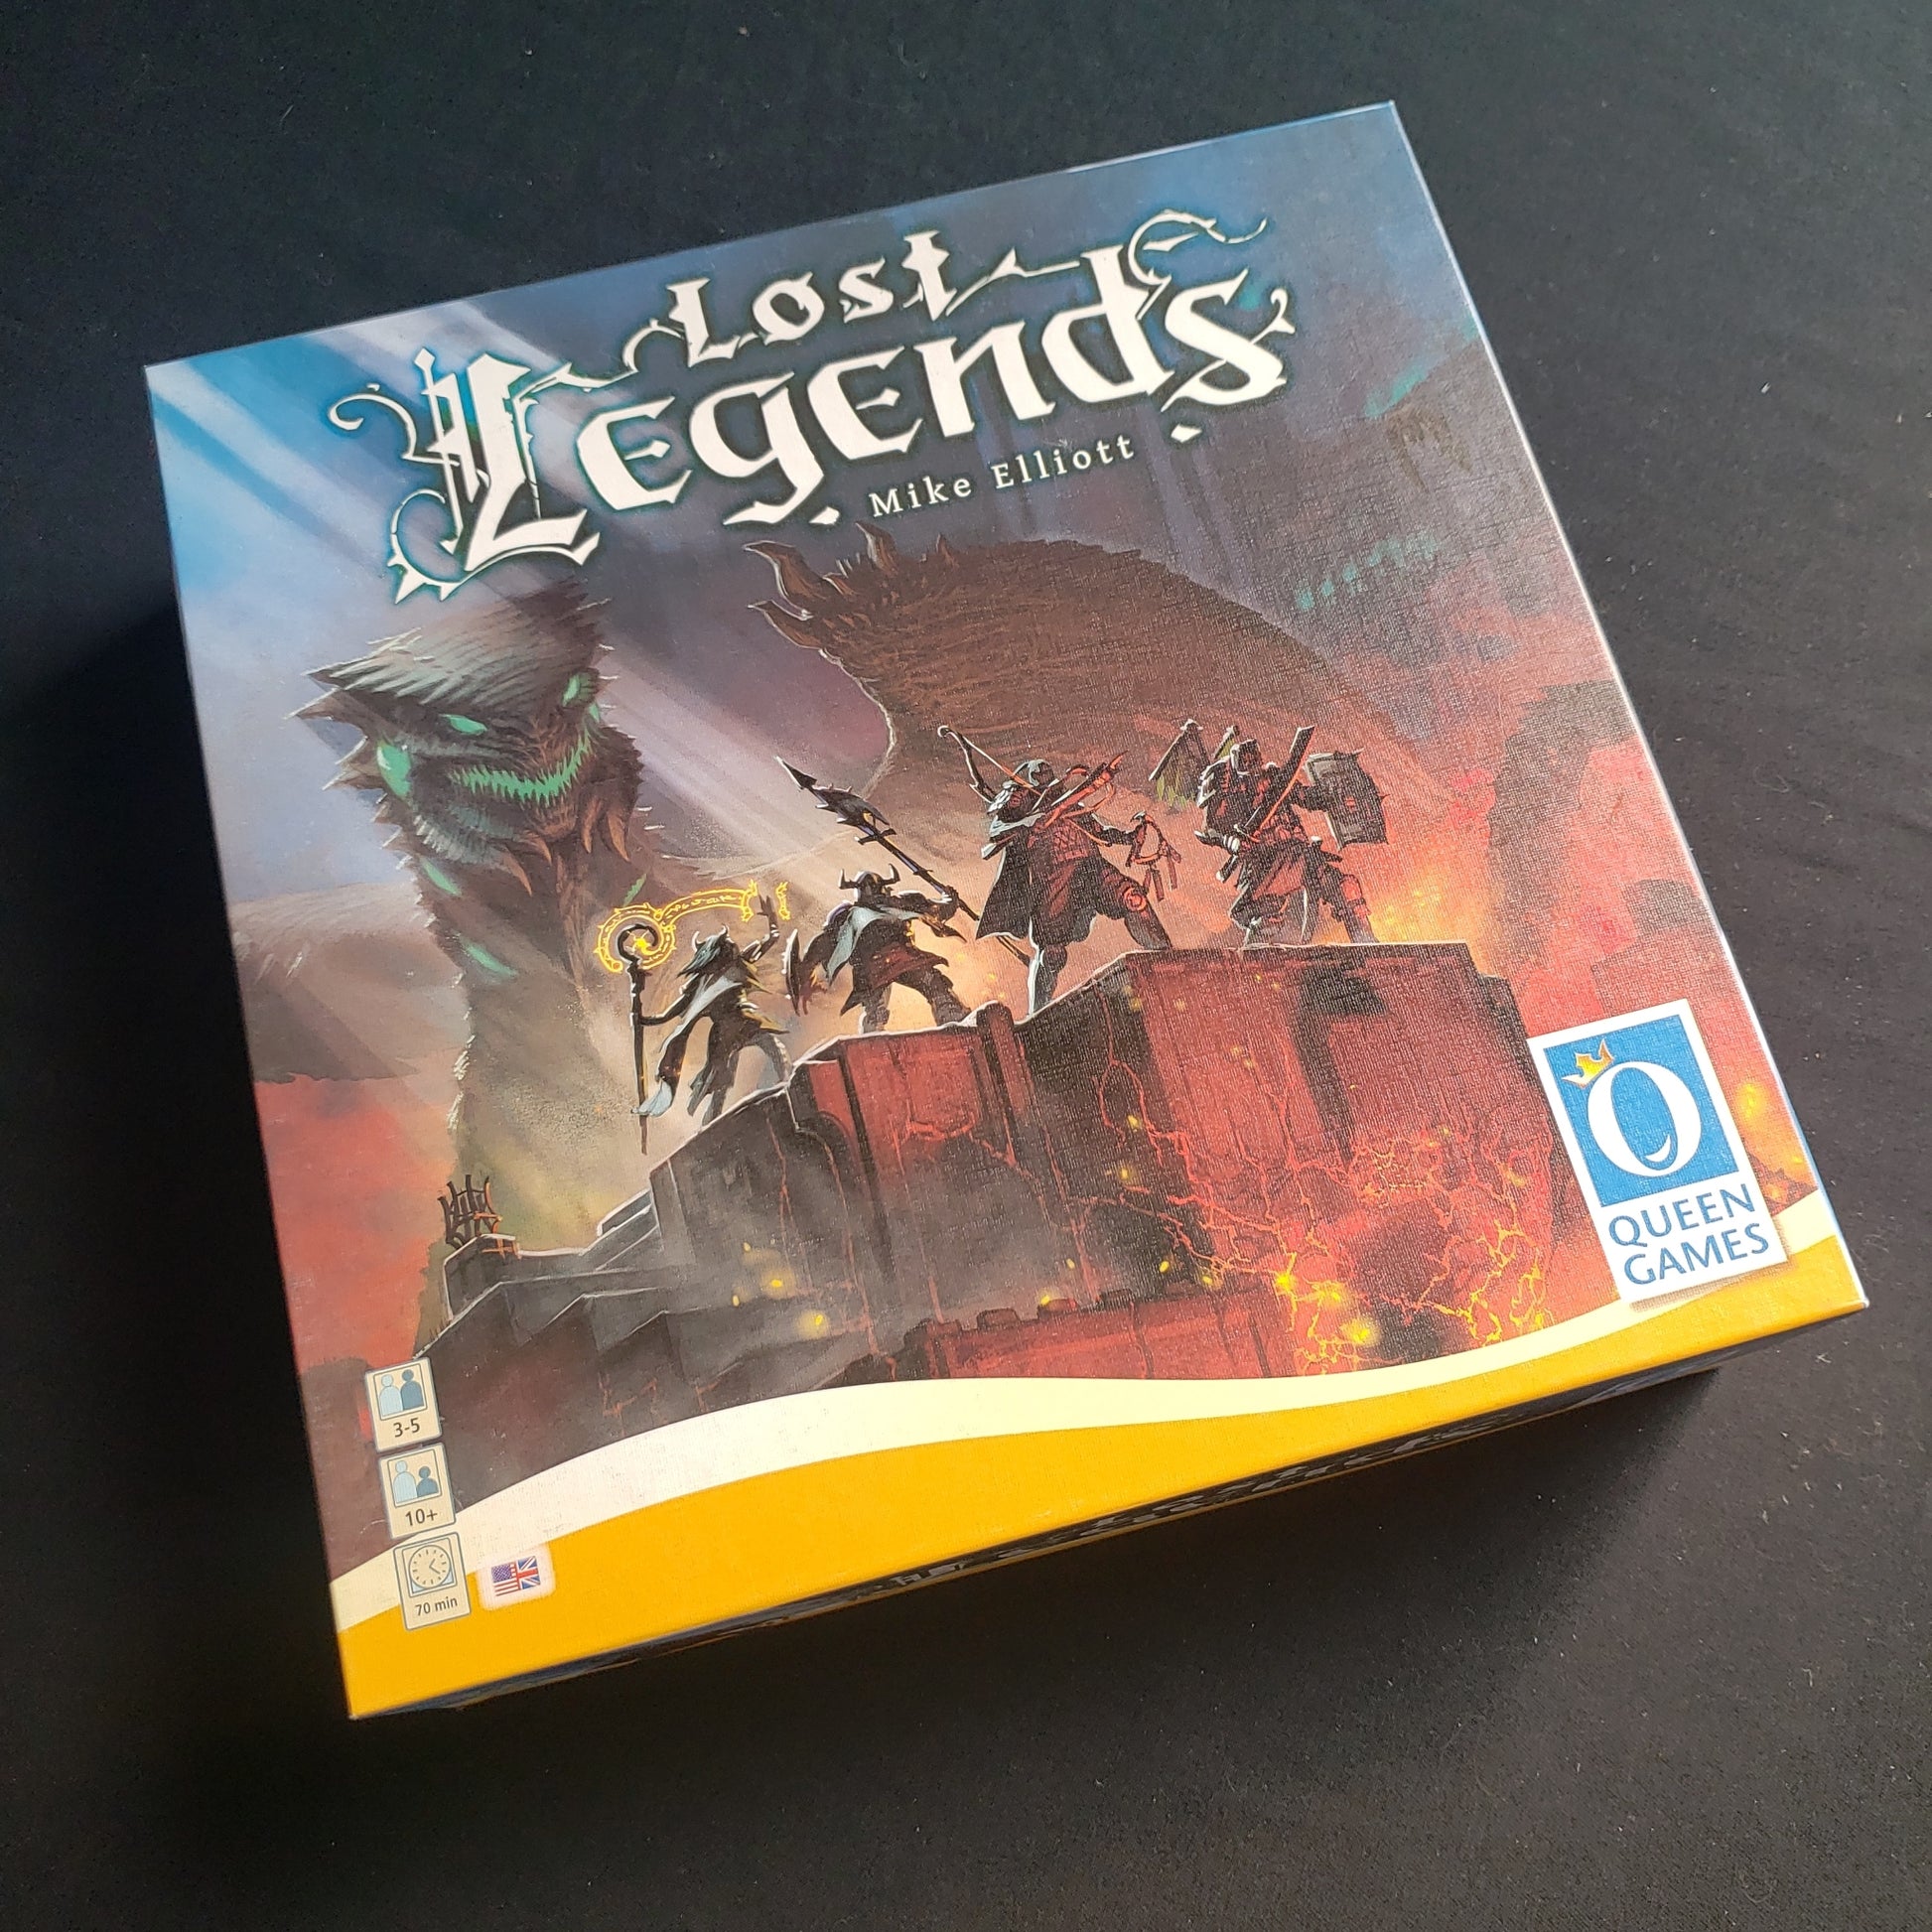 Image shows the front cover of the box of the Lost Legends board game